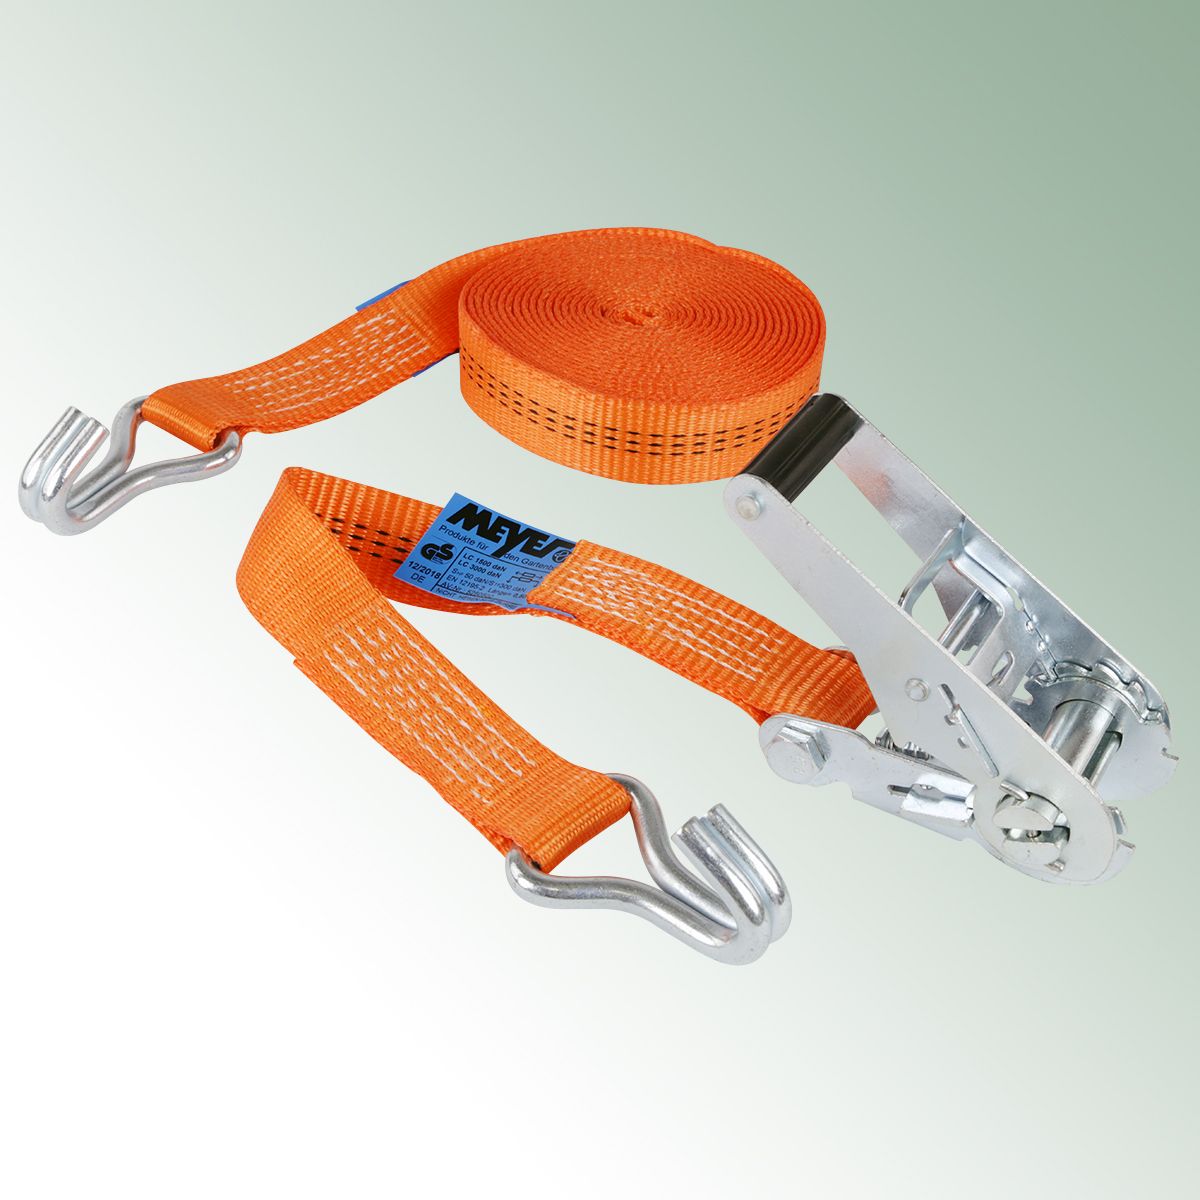 Lashing Strap 35 mm thick 6 m long, 2-parts with ratchet and hook